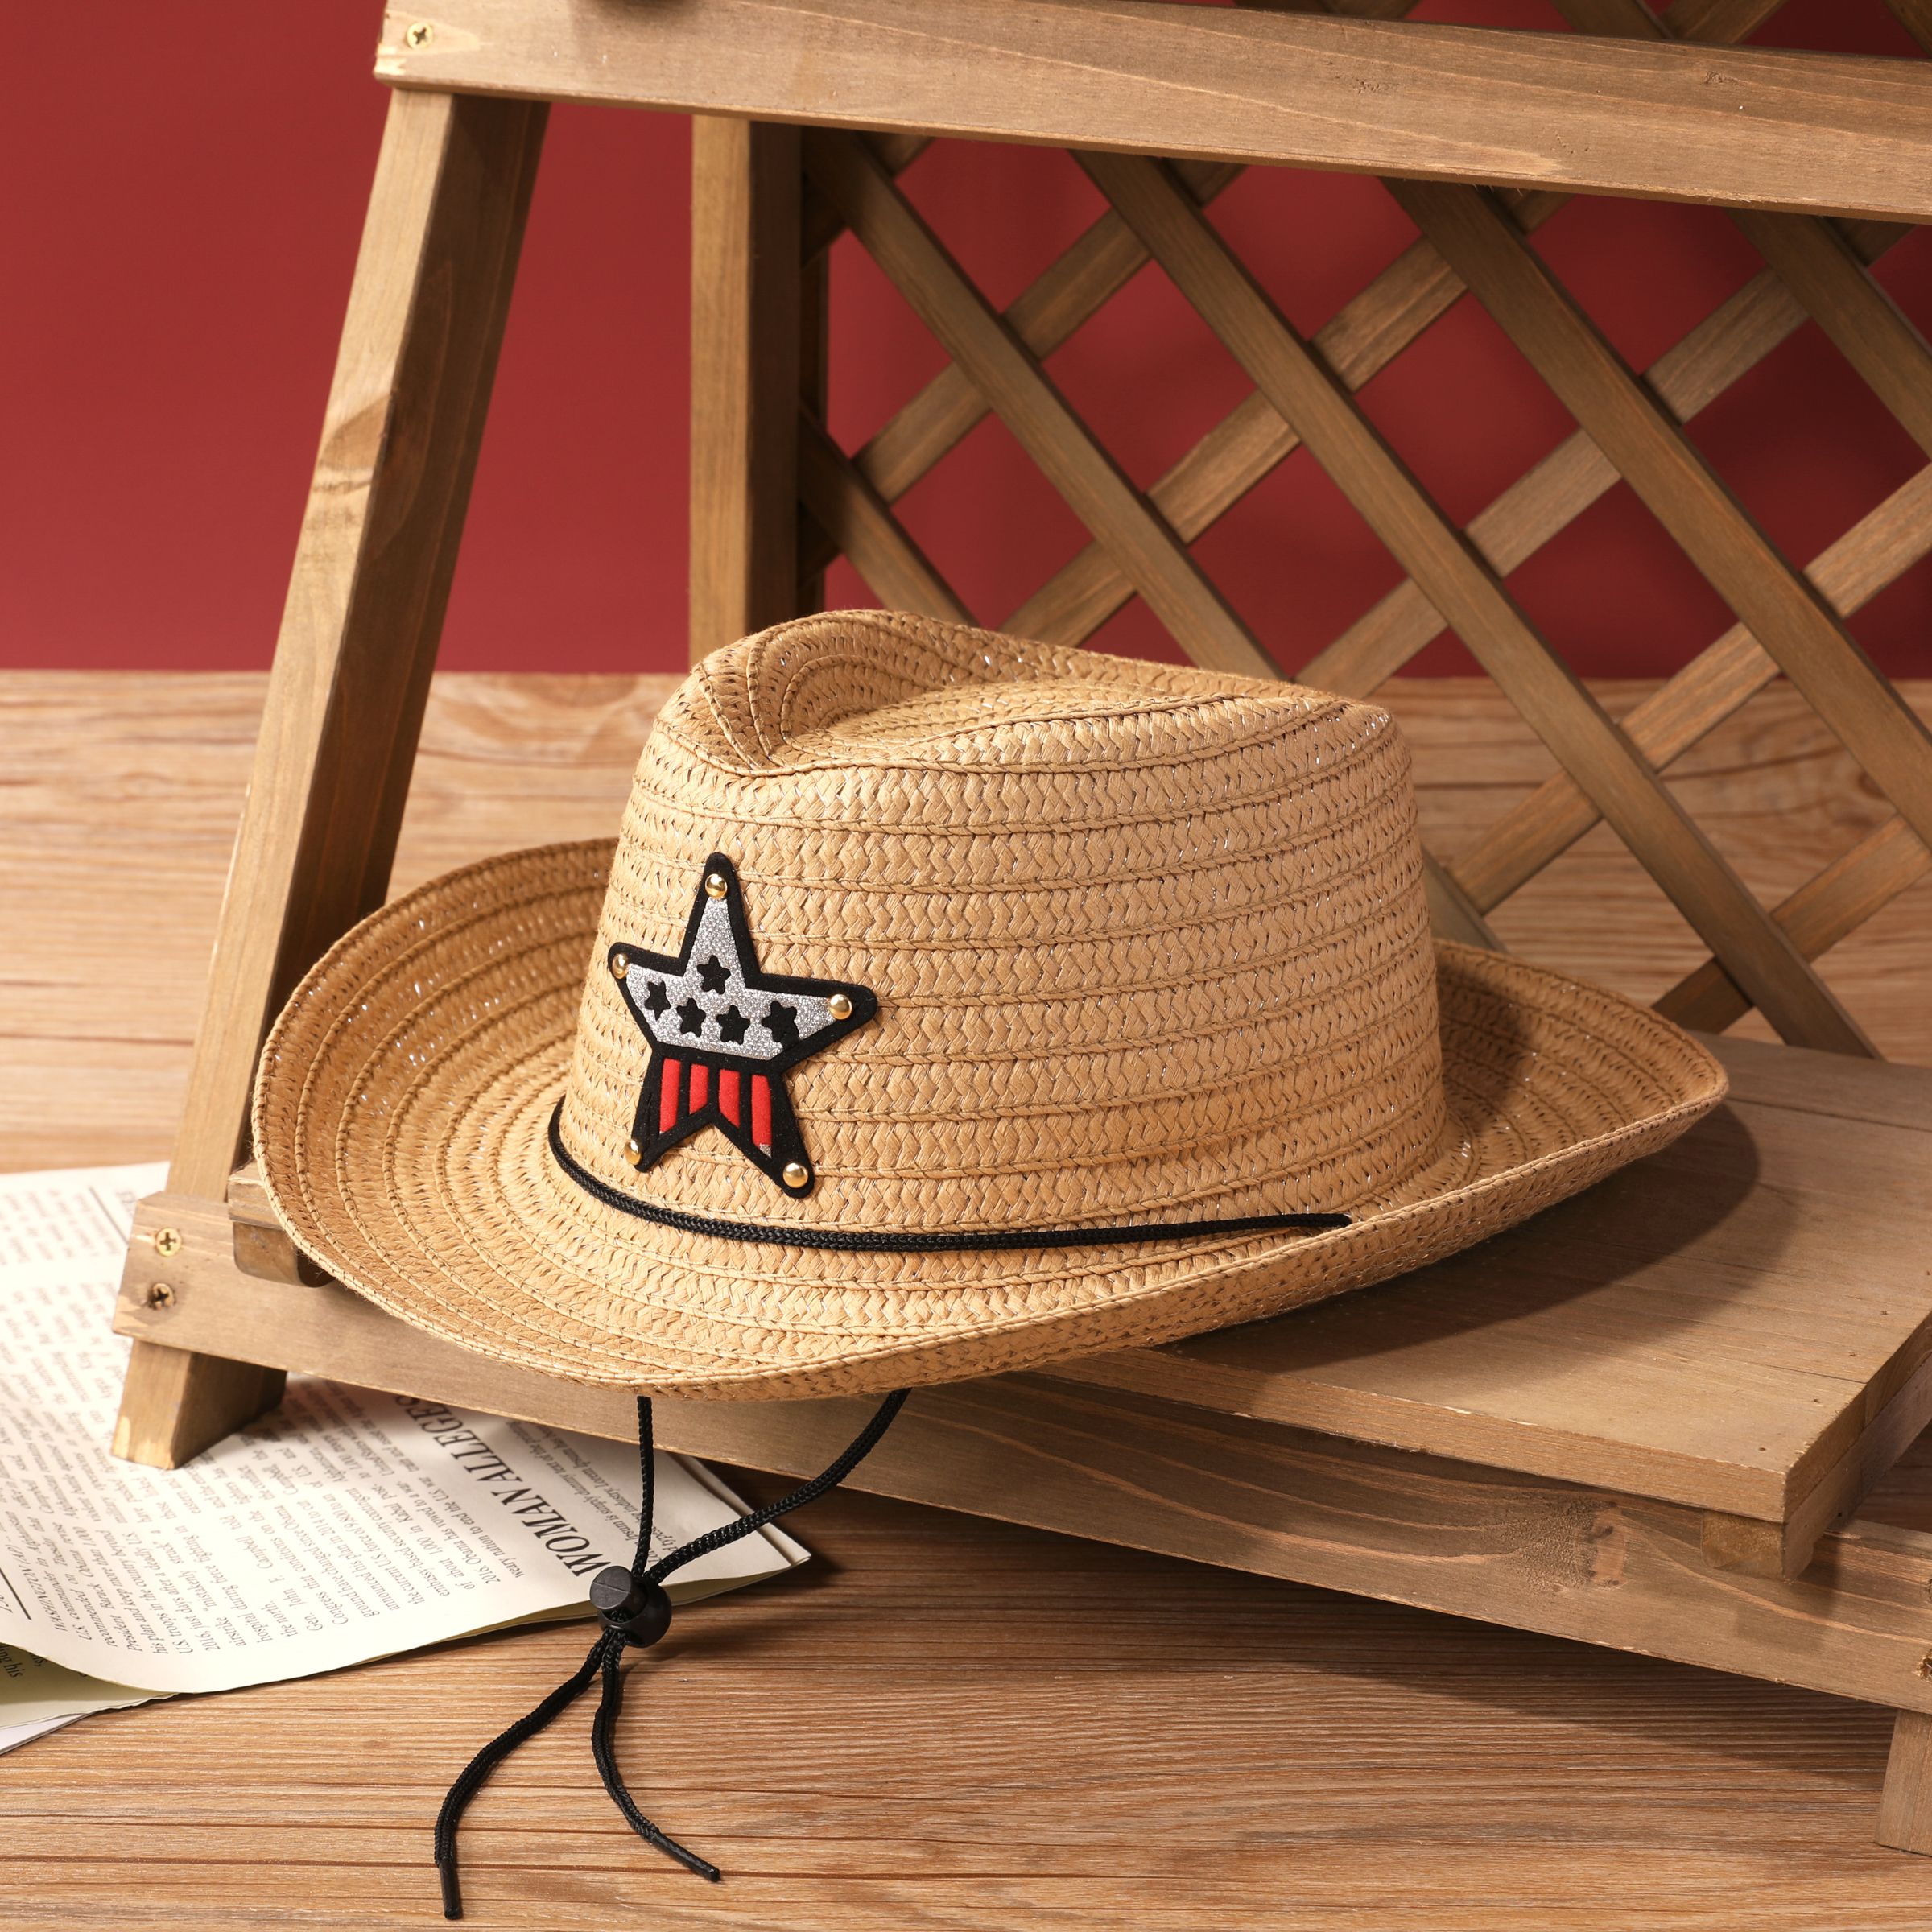 

Western Cowboy Children's Sun Hat for Girls and Boys with Straw Weave, Five-Pointed Star Accent